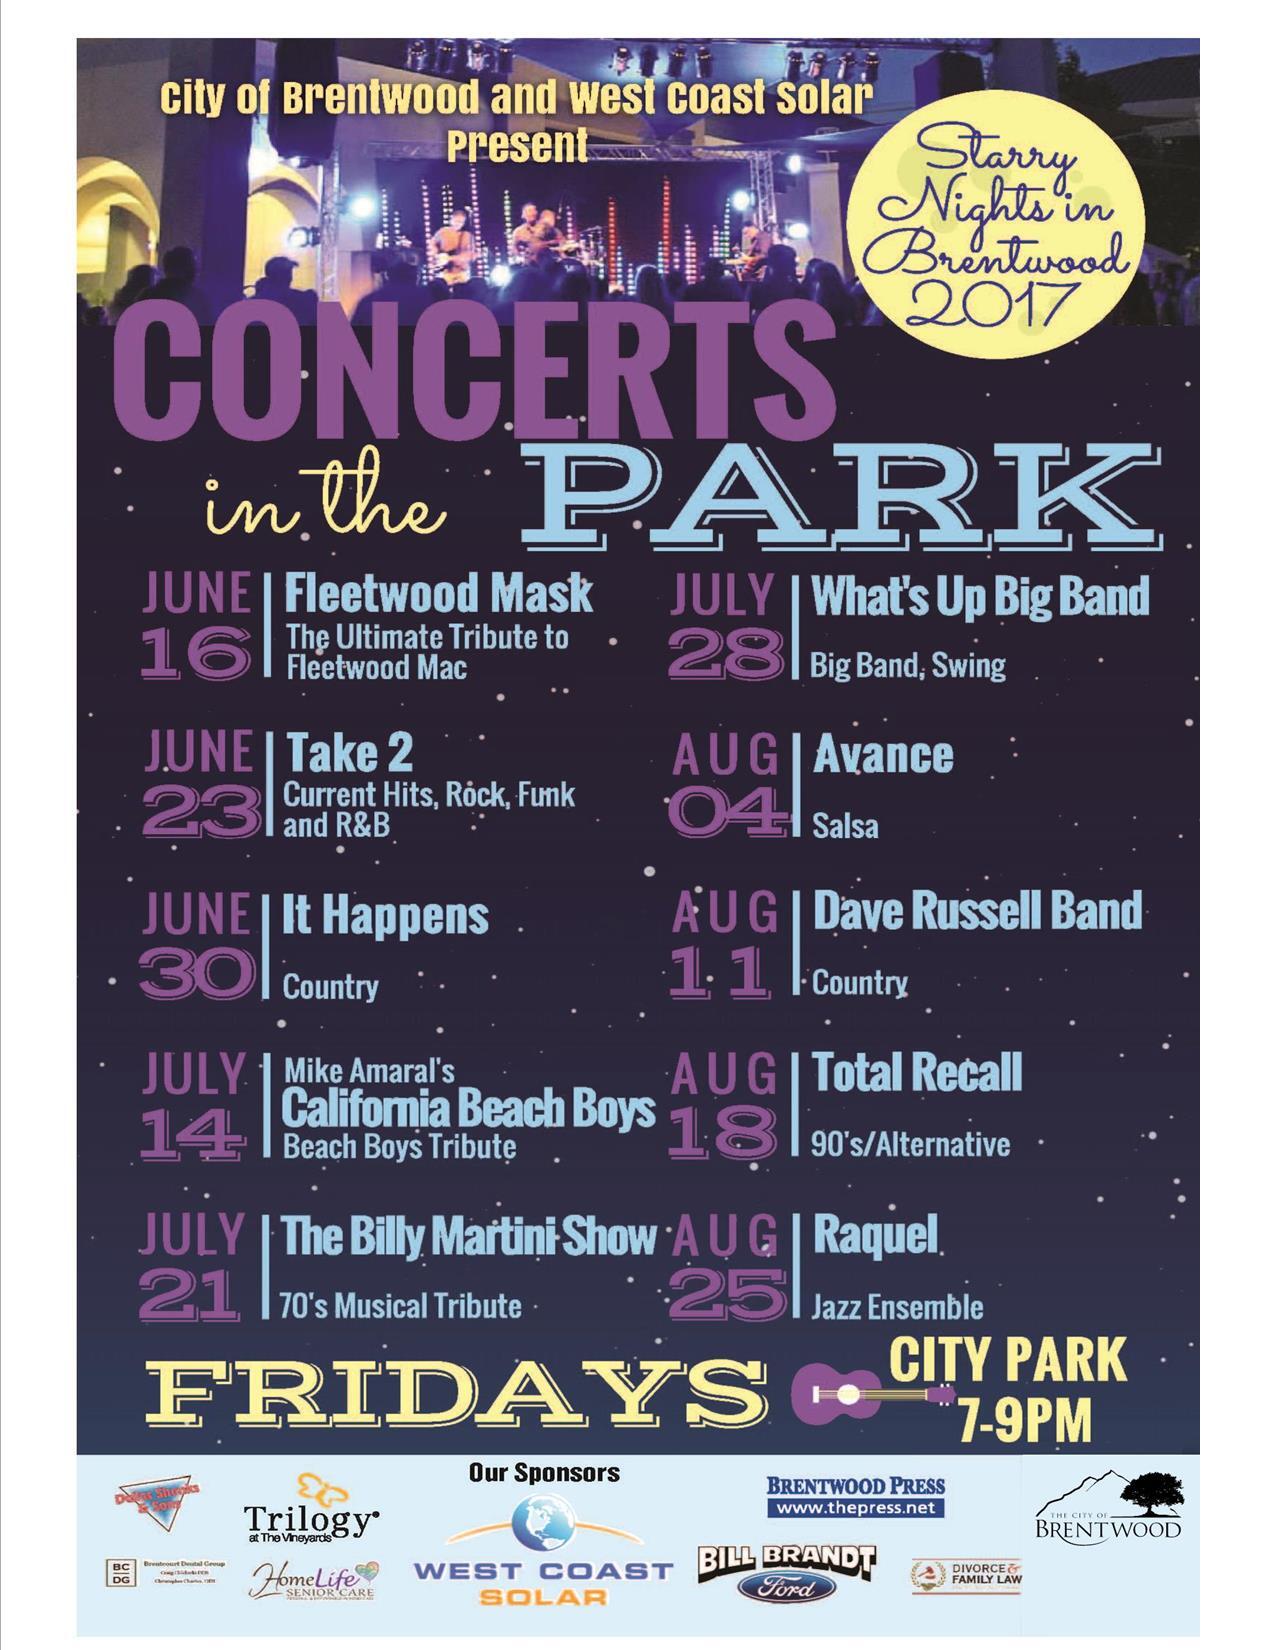 Starry Nights in Brentwood Concert Series Schedule (City of Brentwood